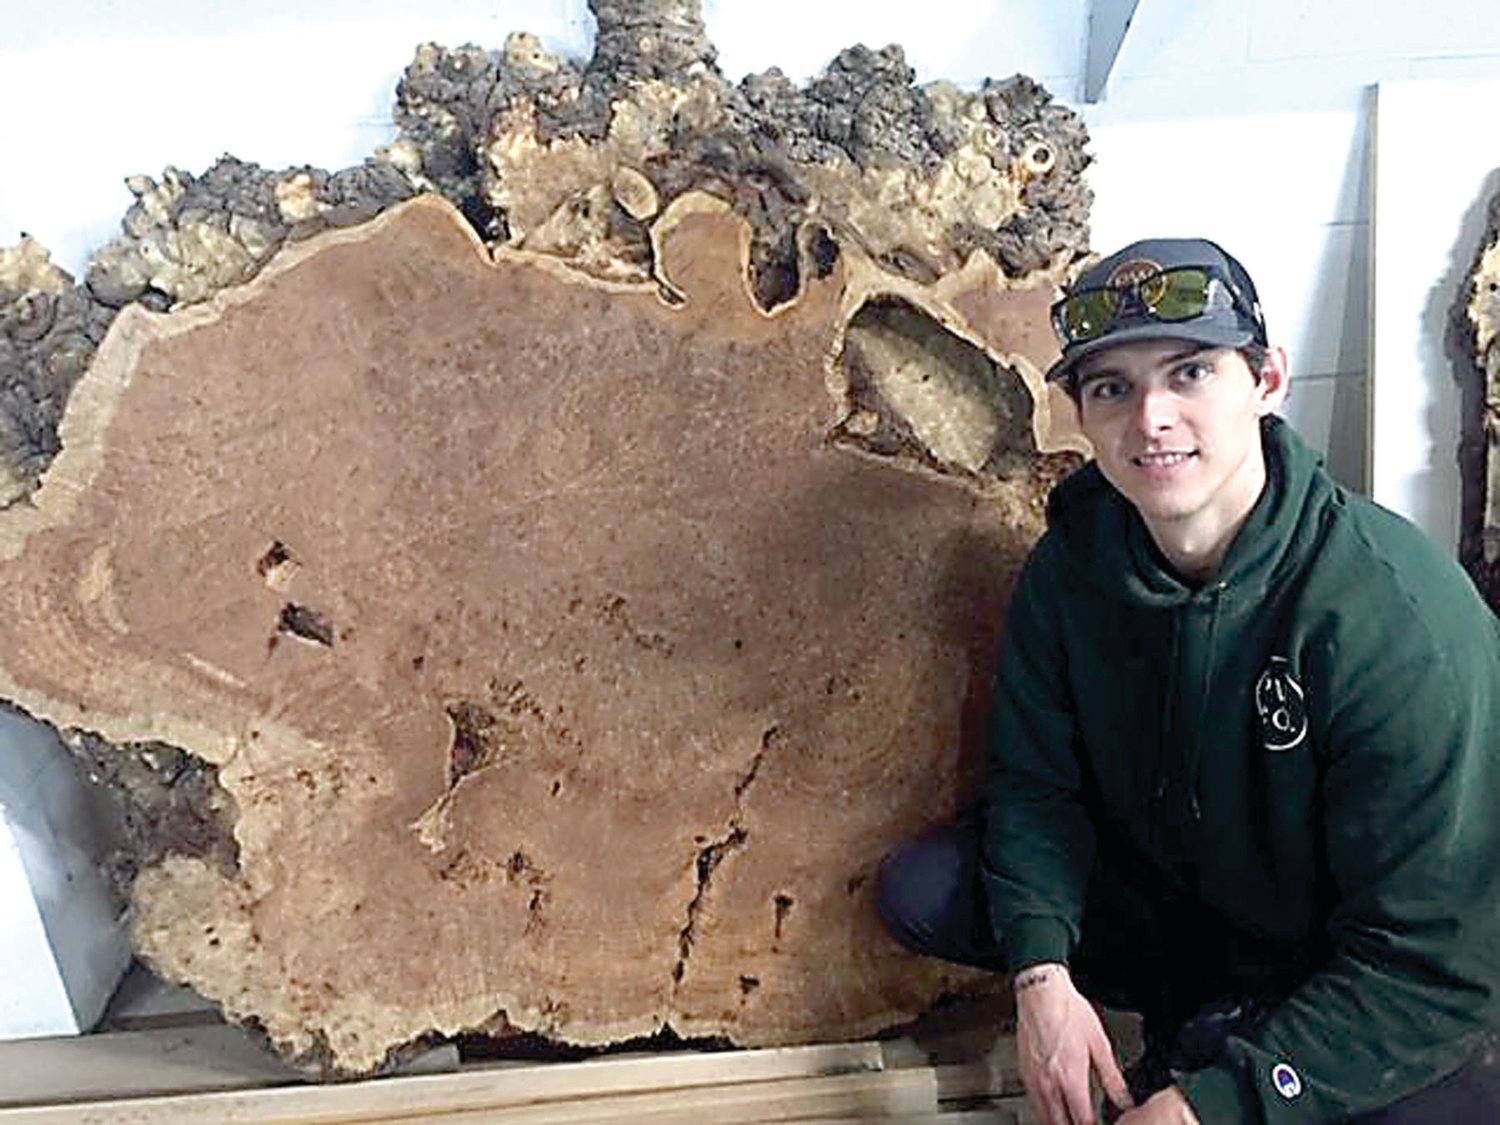 Colin Thompson, founder of Paramount Wood Co., with a slice of burl from a California redwood tree.